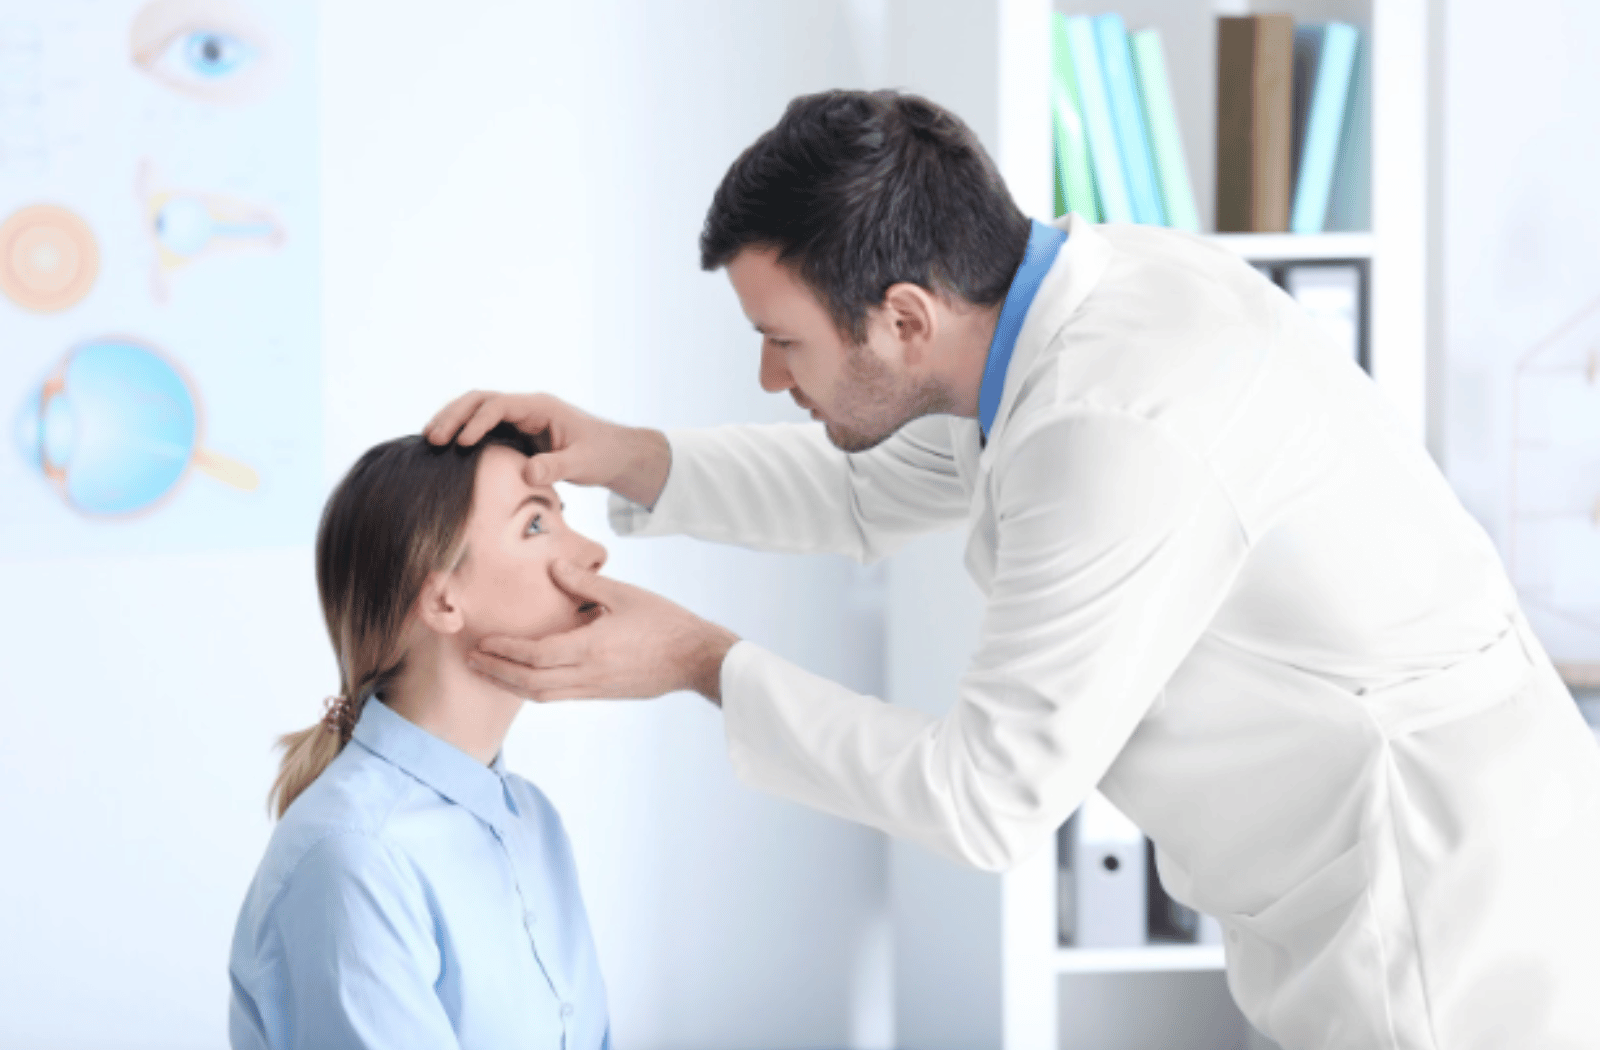 An eye doctor examines a female patient's eyes.